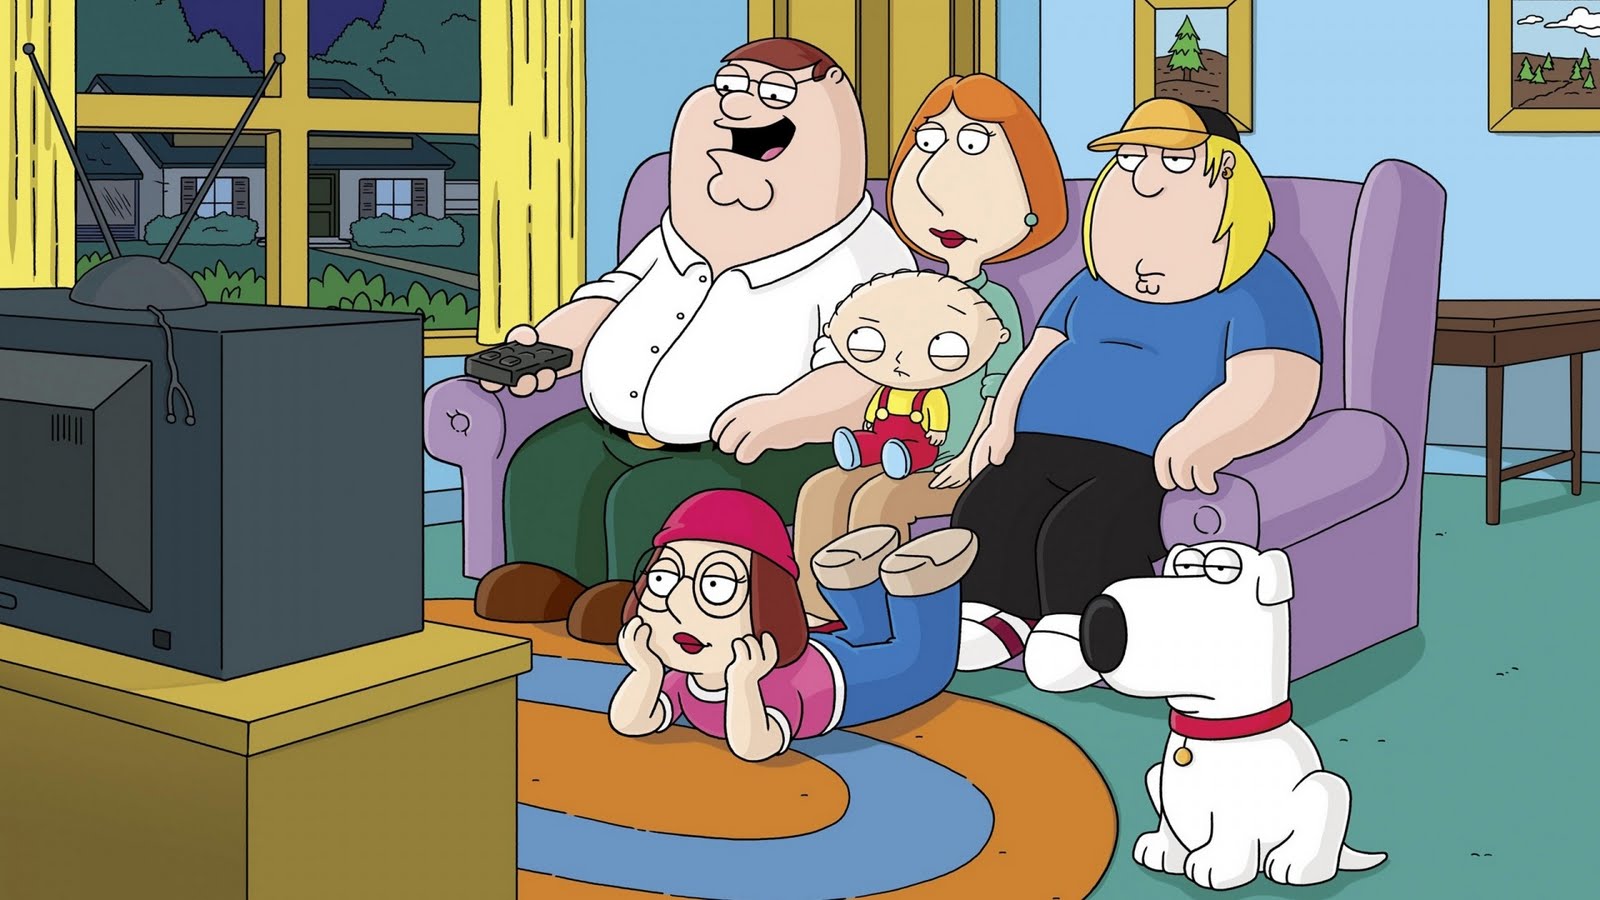  Family Guy HD Desktop WallpapersHigh Resolution Backgrounds for your